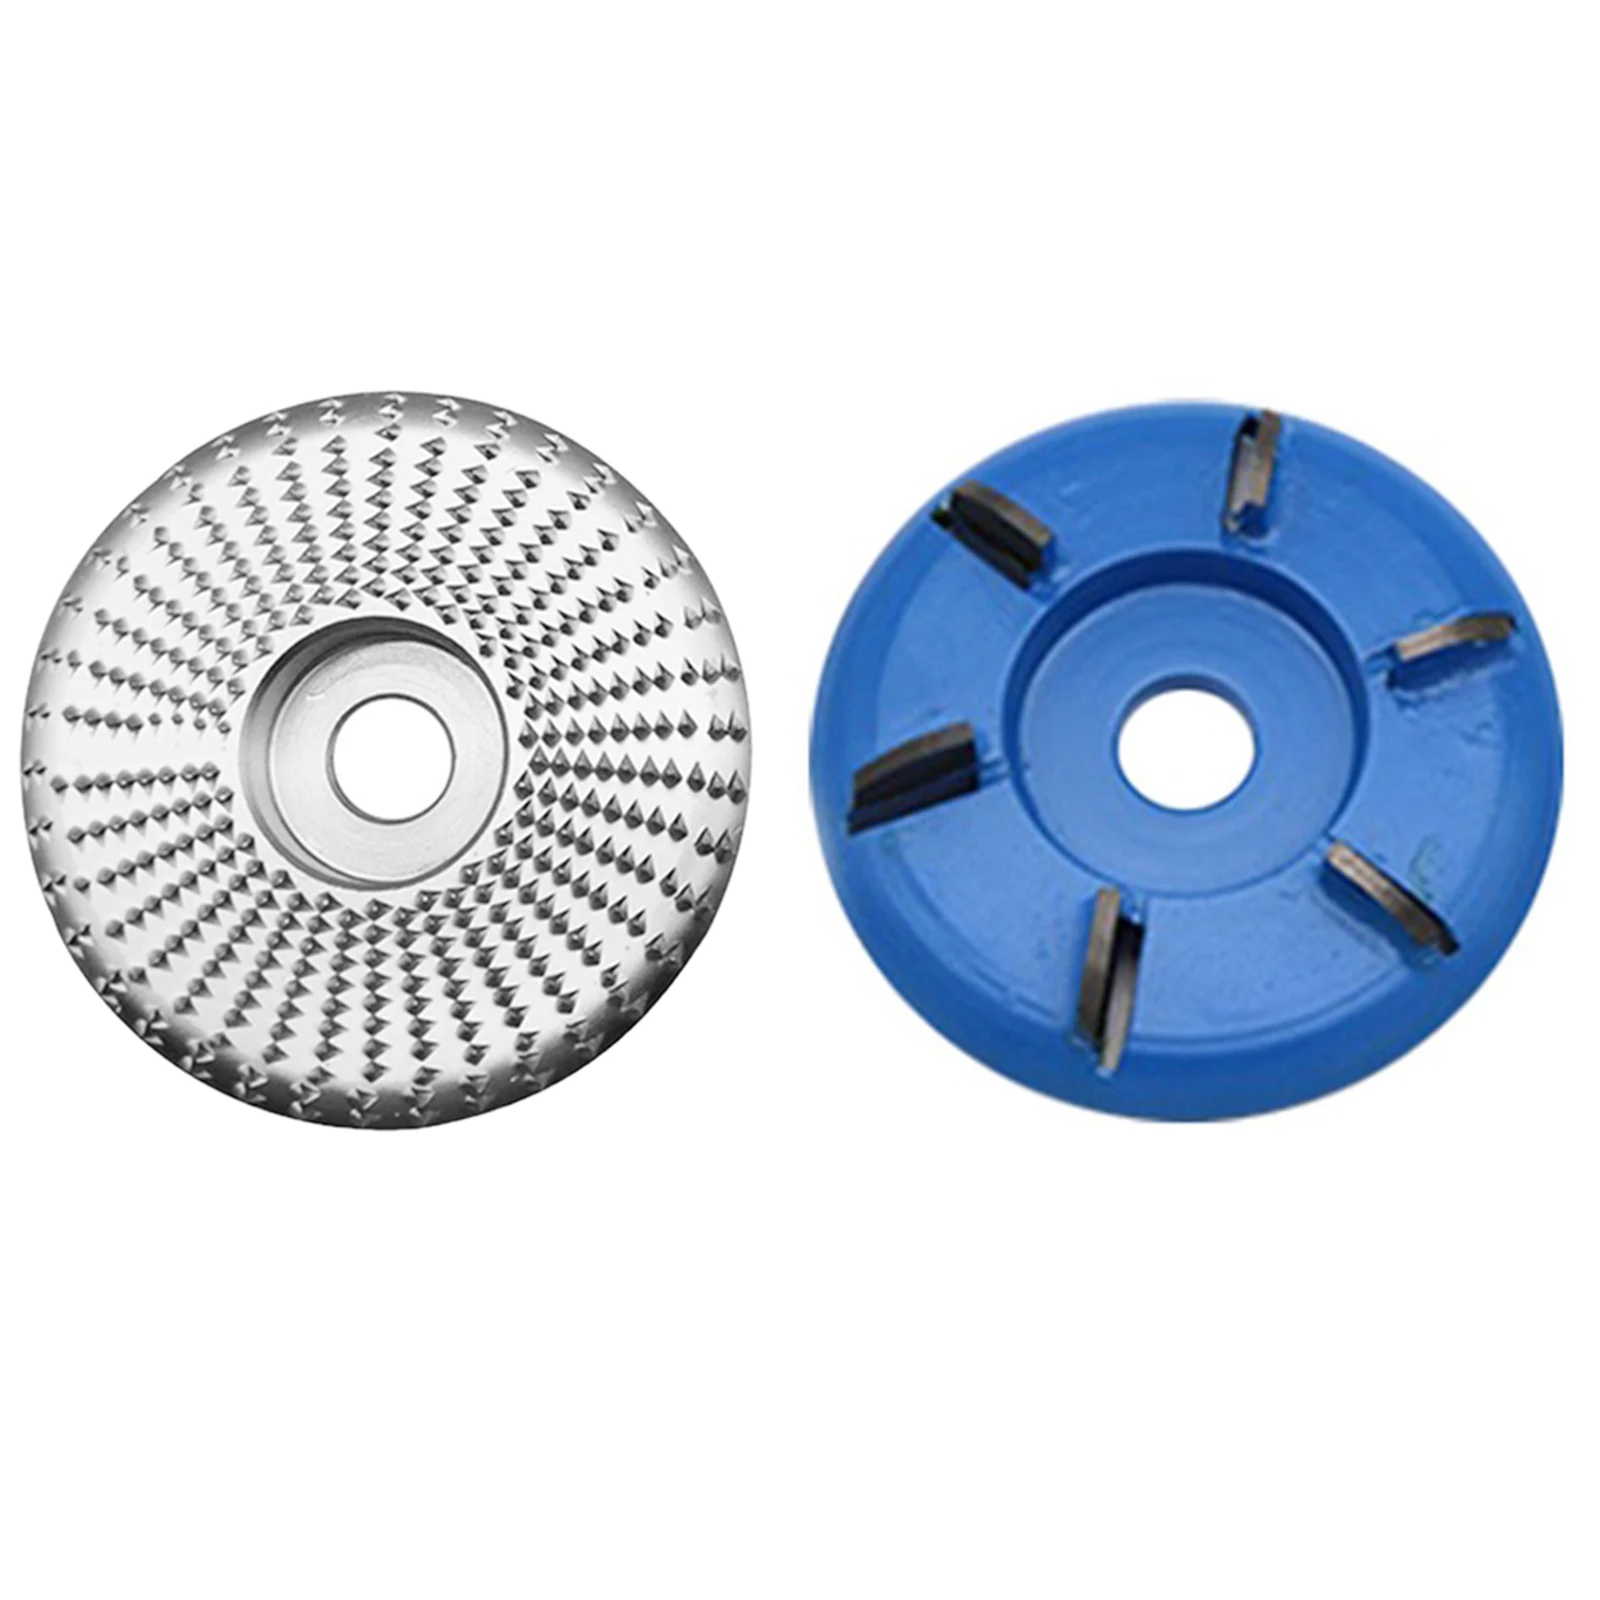 

Carbide Wood Sanding Carving Shaping Disc for Angle Grinder Effortless Material Removal Suitable for Metal Wood Products